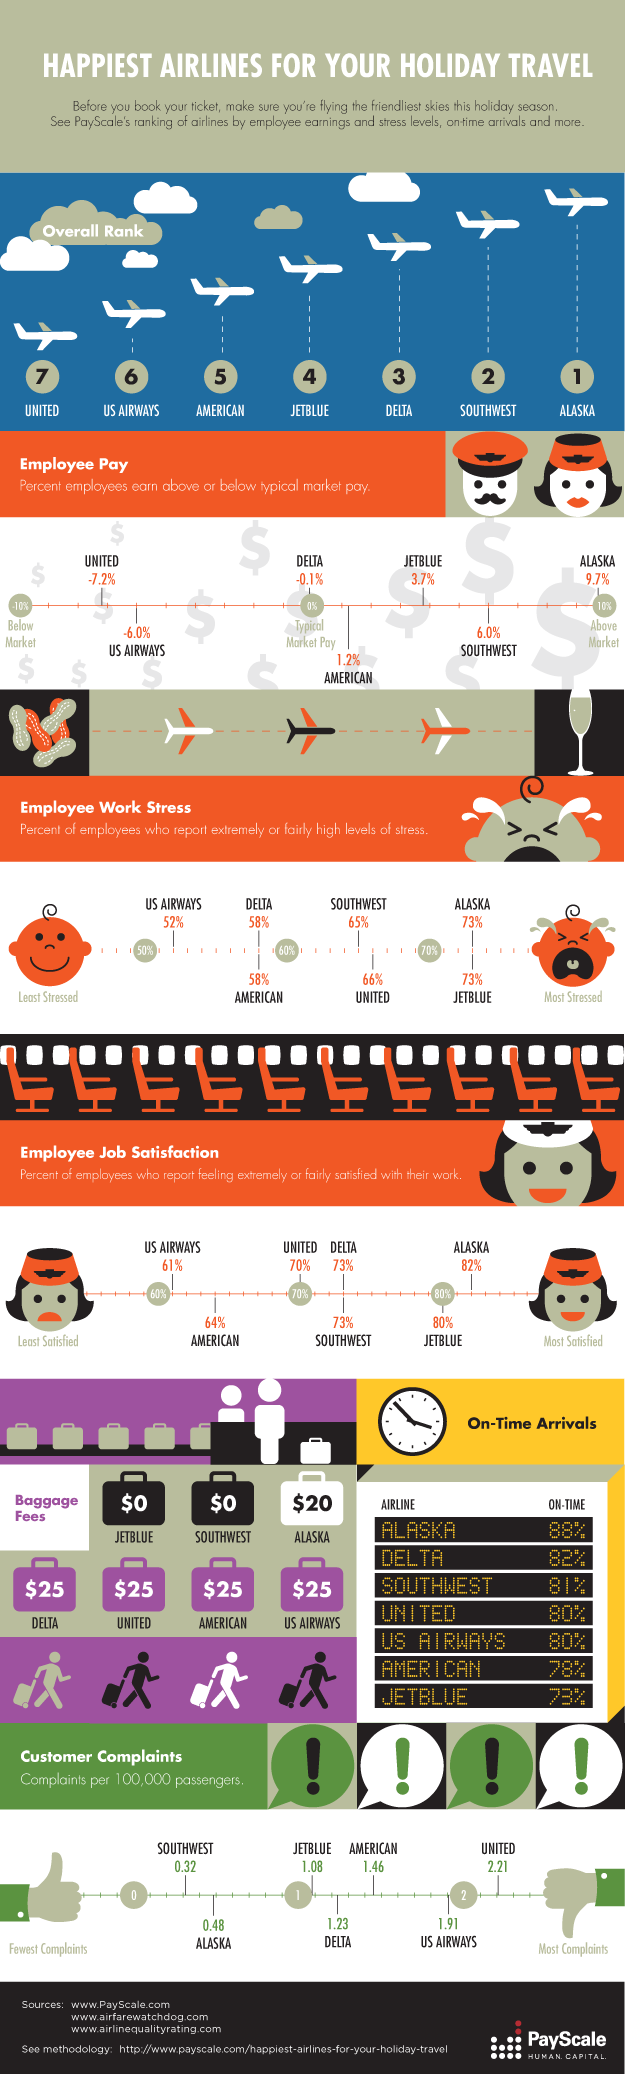 Happiest Airlines for Your Holiday Travel [infographic]